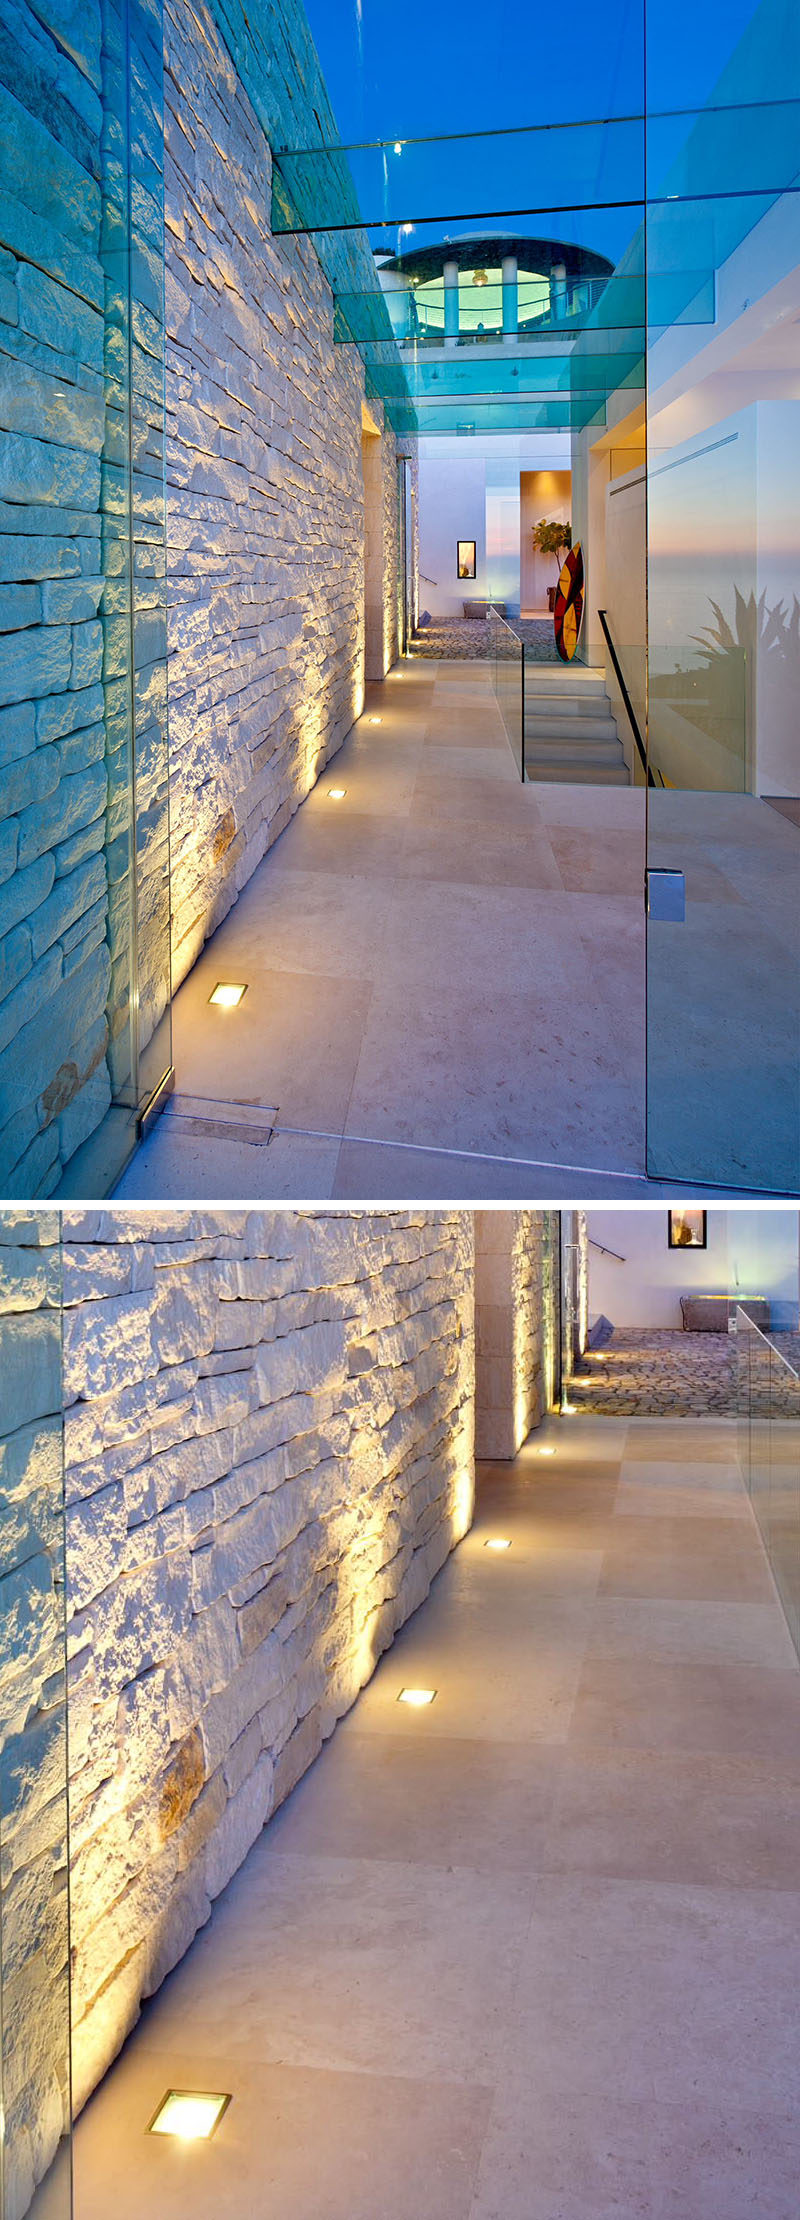 7 Interiors That Use Dramatic Uplighting To Brighten A Space // Warm lights run along the bottom of the entry way wall and highlight the texture of the stones used in the wall.